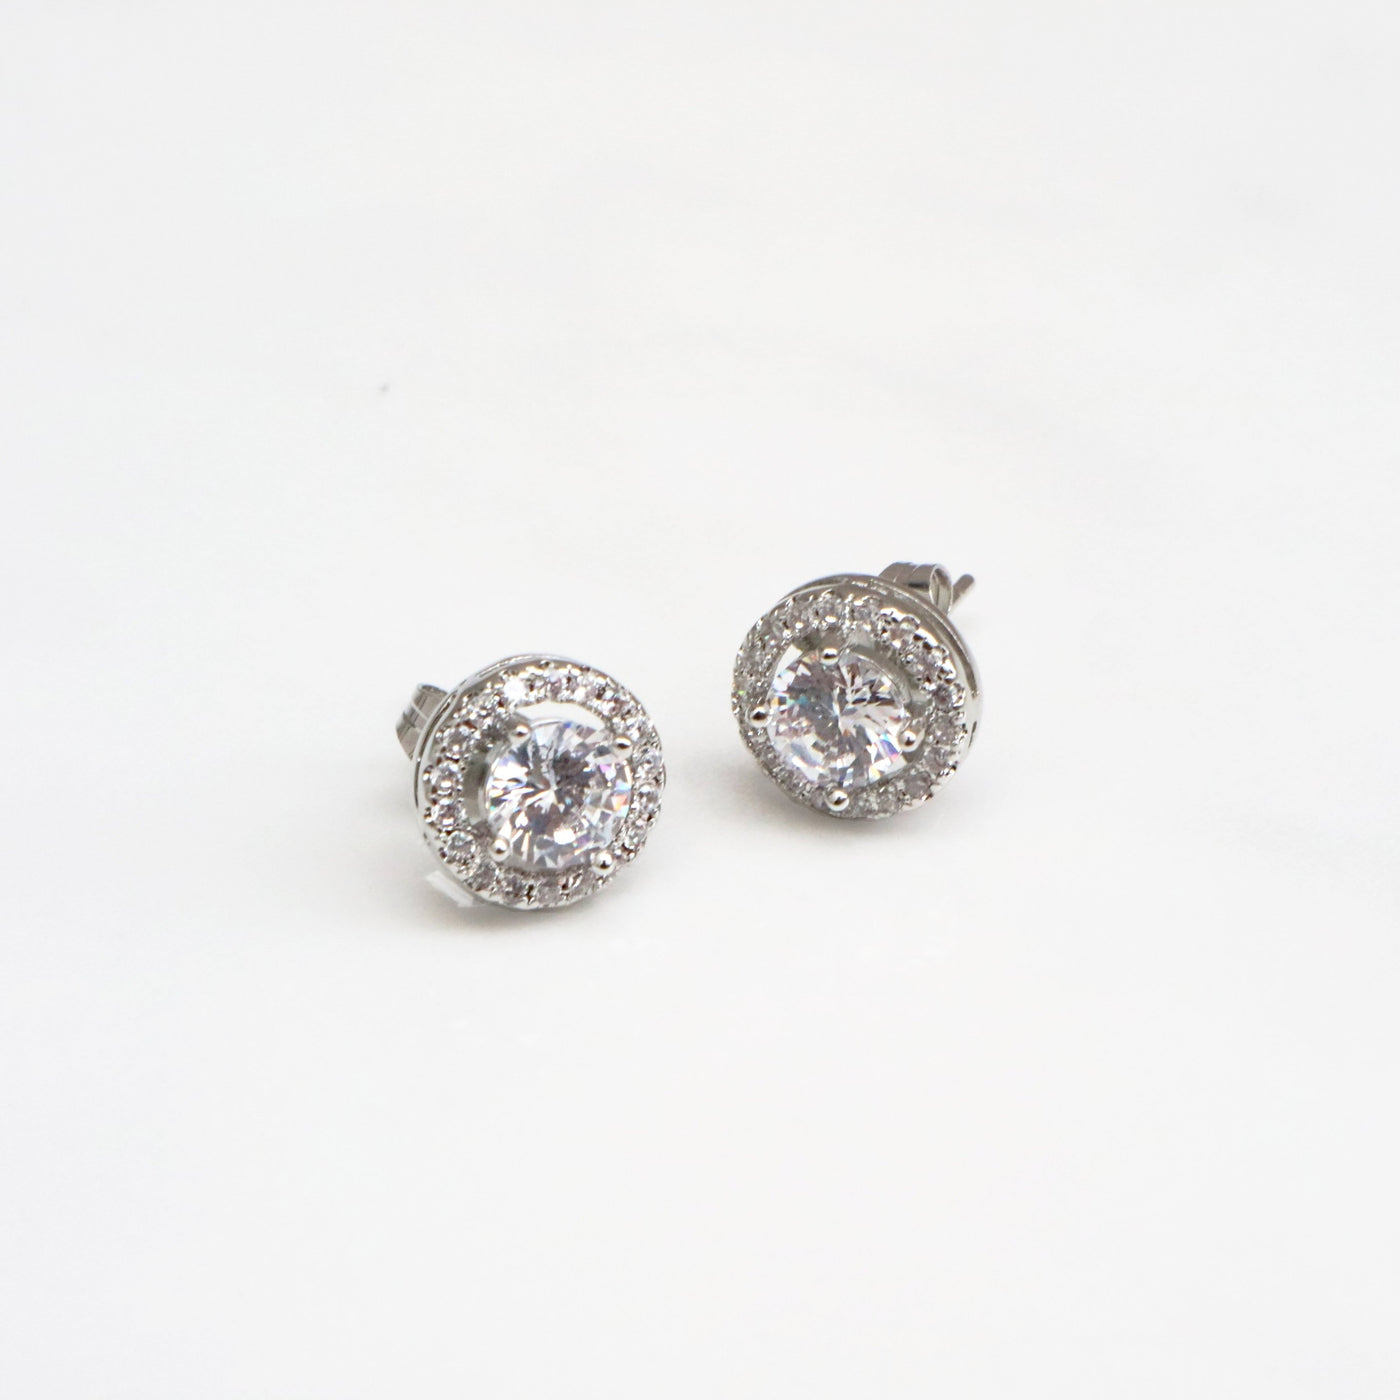 10mm Silver Cubic Zirconia Stud Earrings with a 6mm cubic zirconia central stone surrounded by smaller zirconia stones.